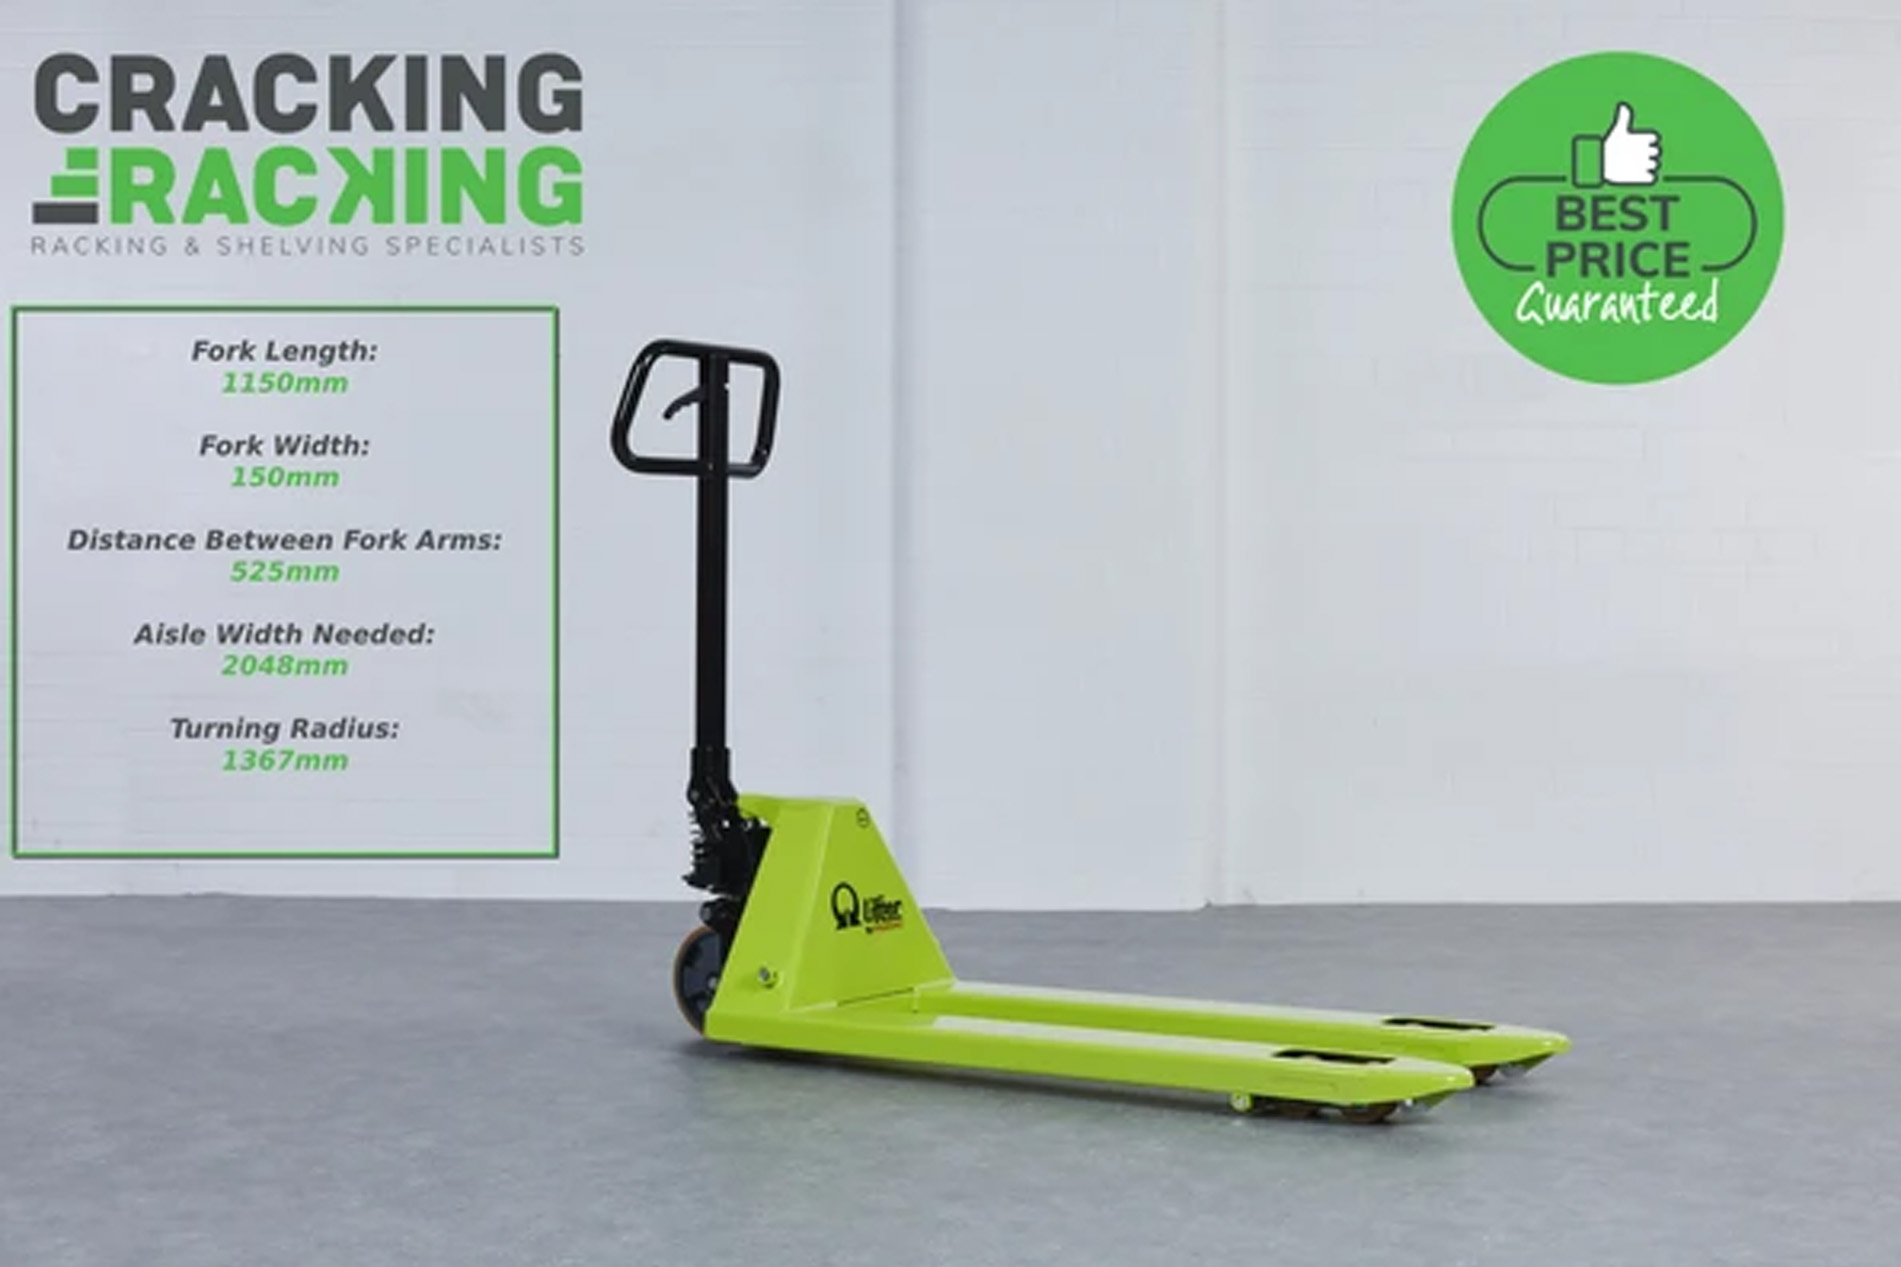 Basic Hand Pallet Truck with 2500kg Load Capacity Manually Operated